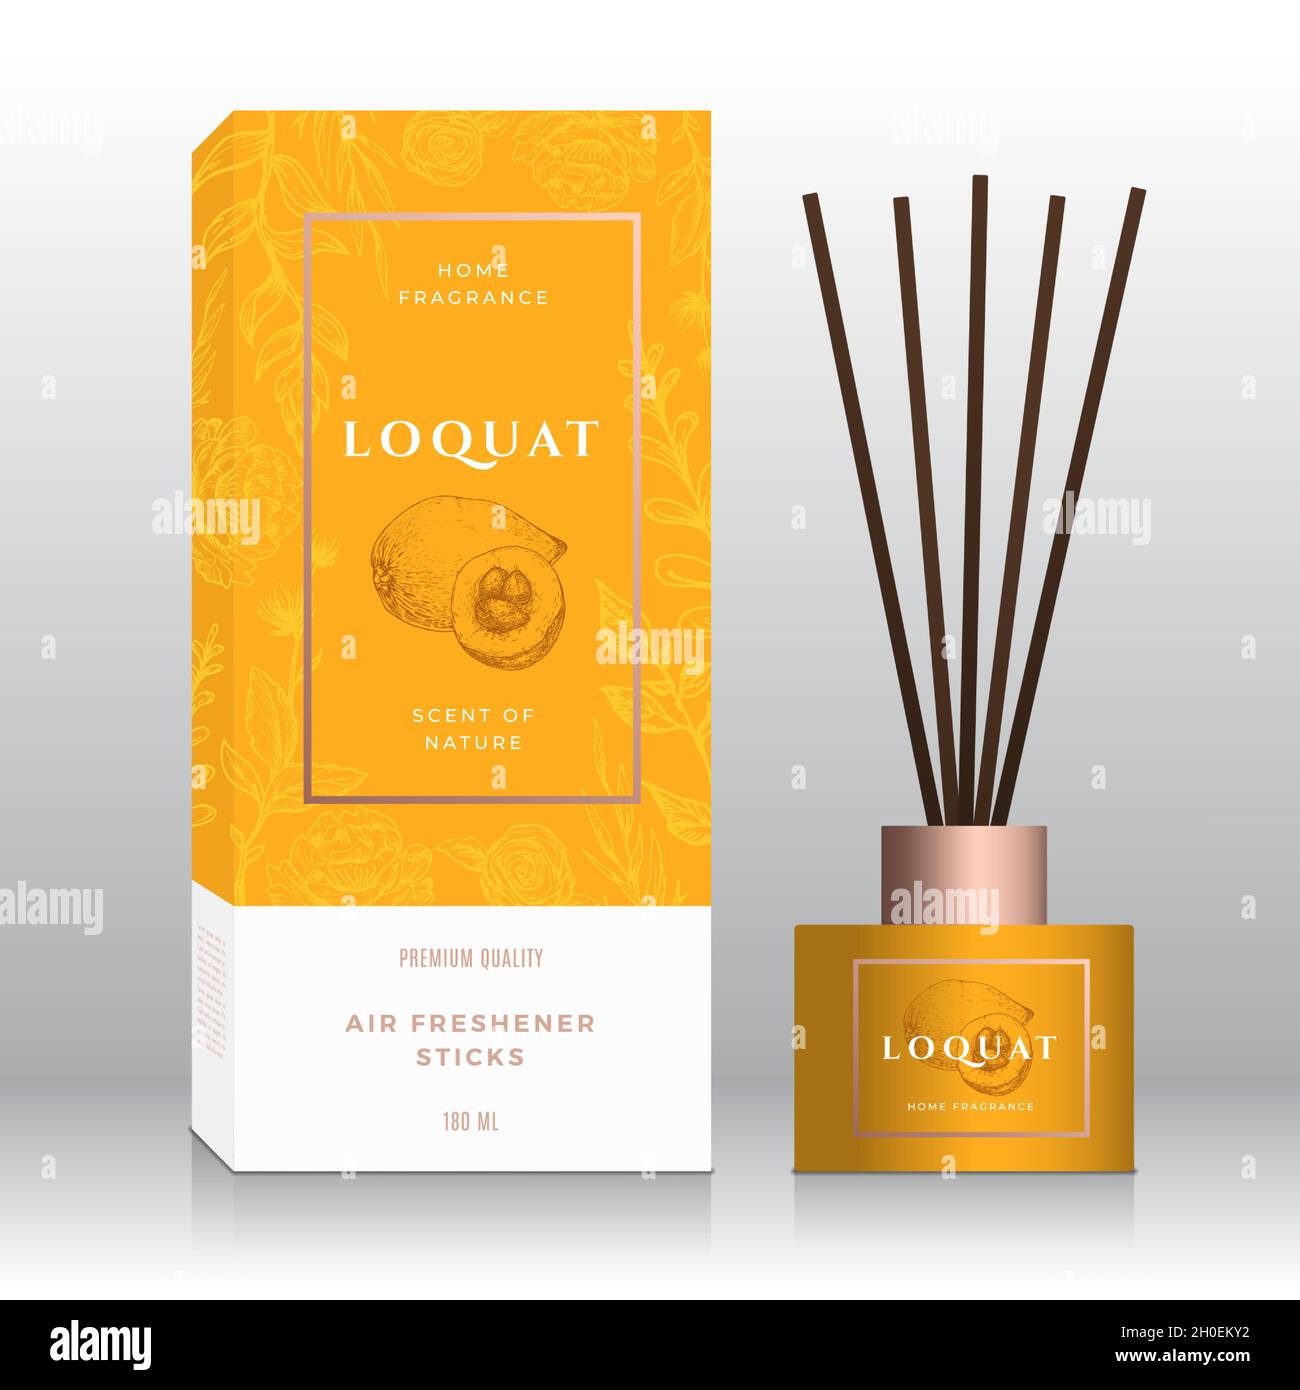 Loquat Home Fragrance Sticks Abstract Vector Label Box Template. Hand Drawn Sketch Flowers, Leaves Background. Retro Typography. Room Perfume Stock Vector